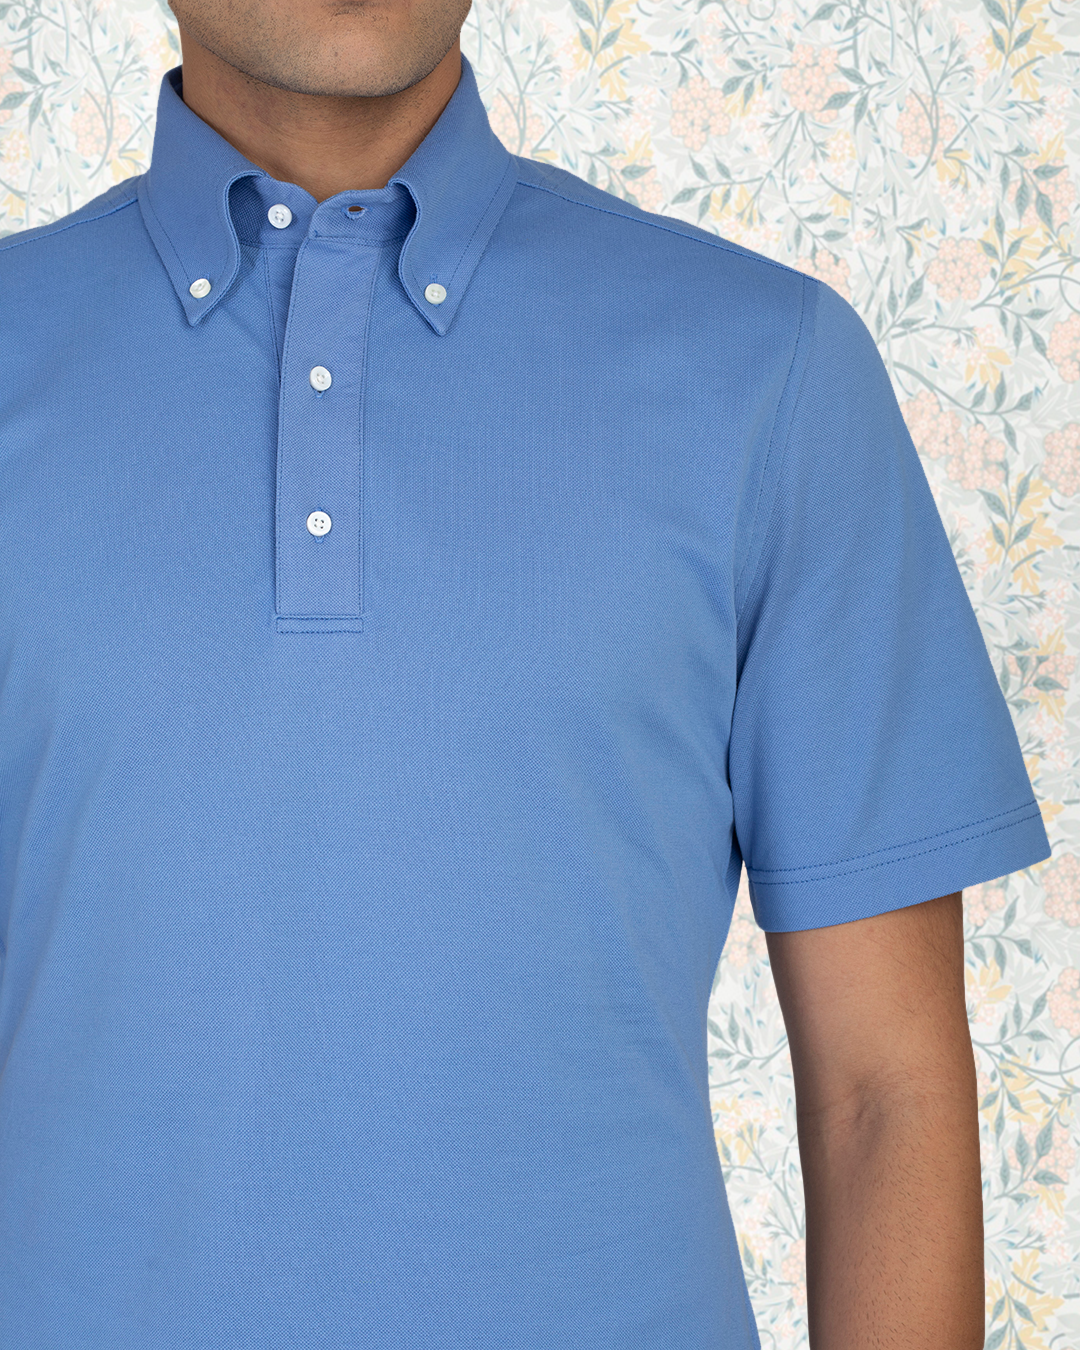 Close up view of model wearing the custom oxford polo shirt for men by Luxire in soft blue